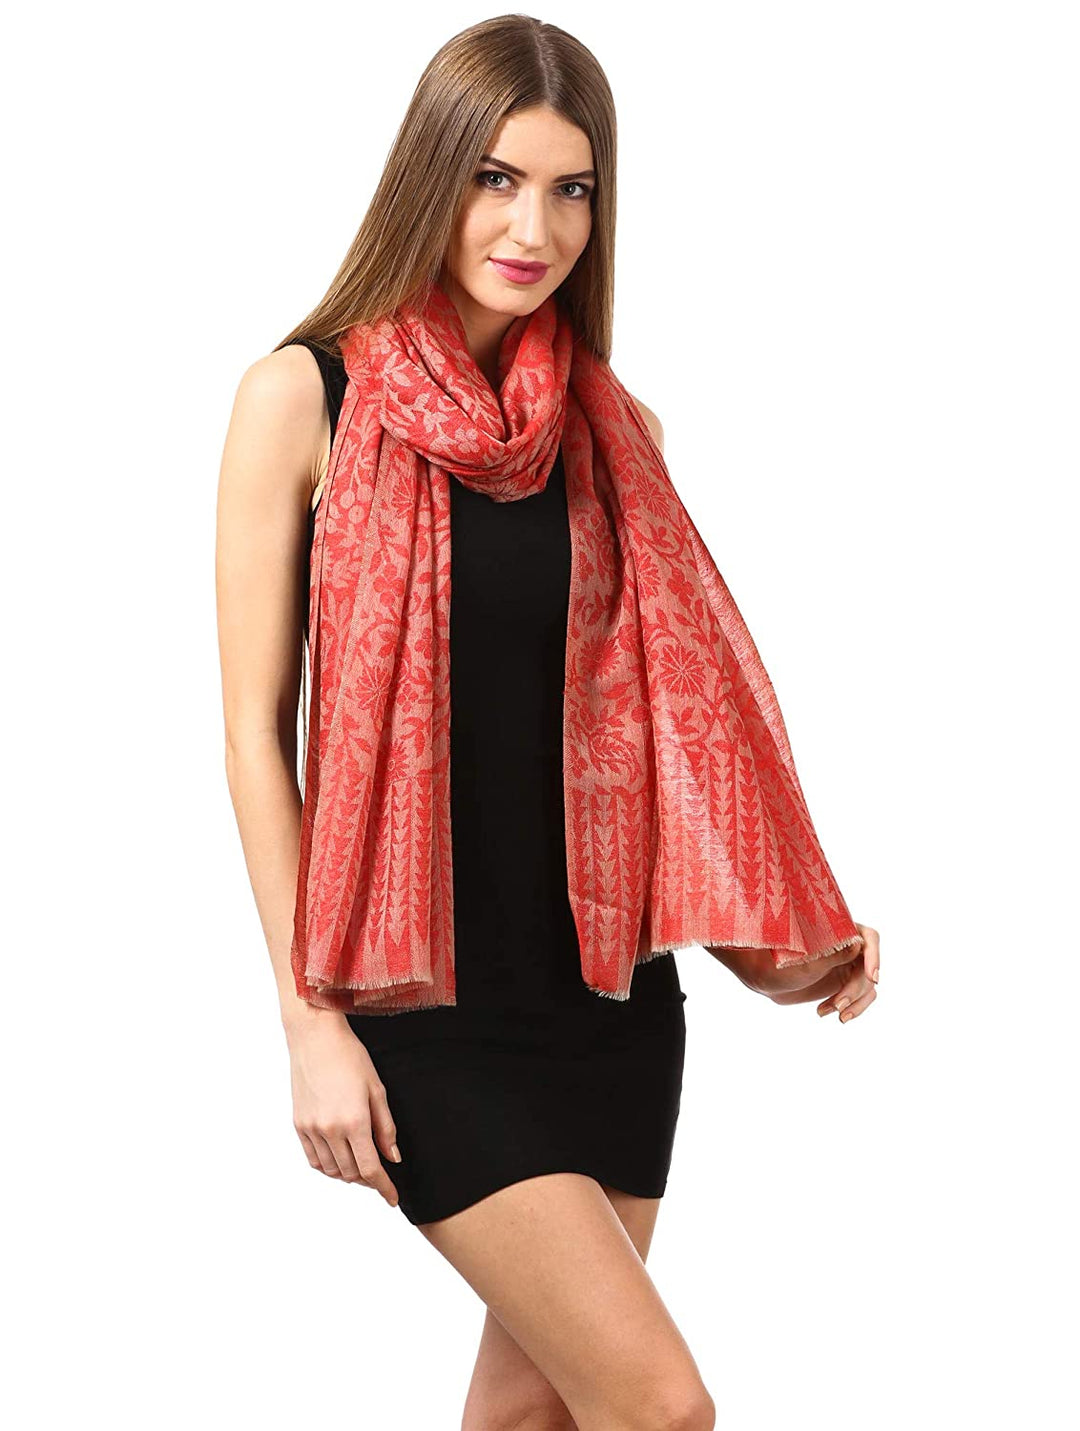 Pashtush India Stole Women's Silk-Pashmina Reversible Floral Scarf, Soft and Warm, Scarlet Red